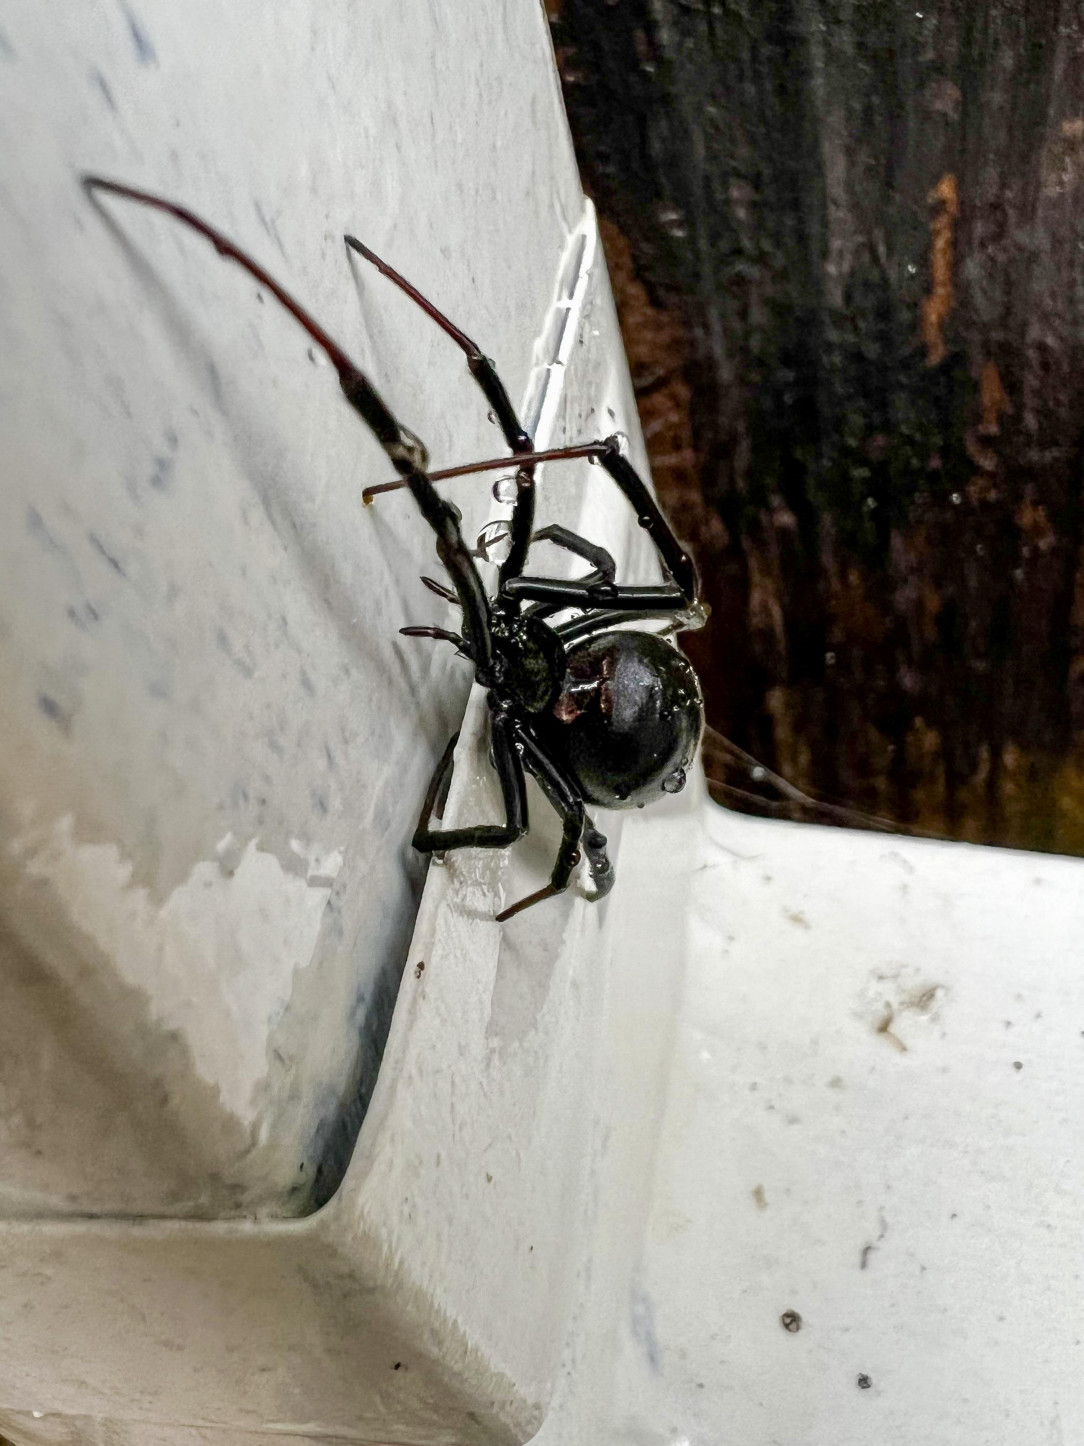 Black widow I found when cleaning the gutters